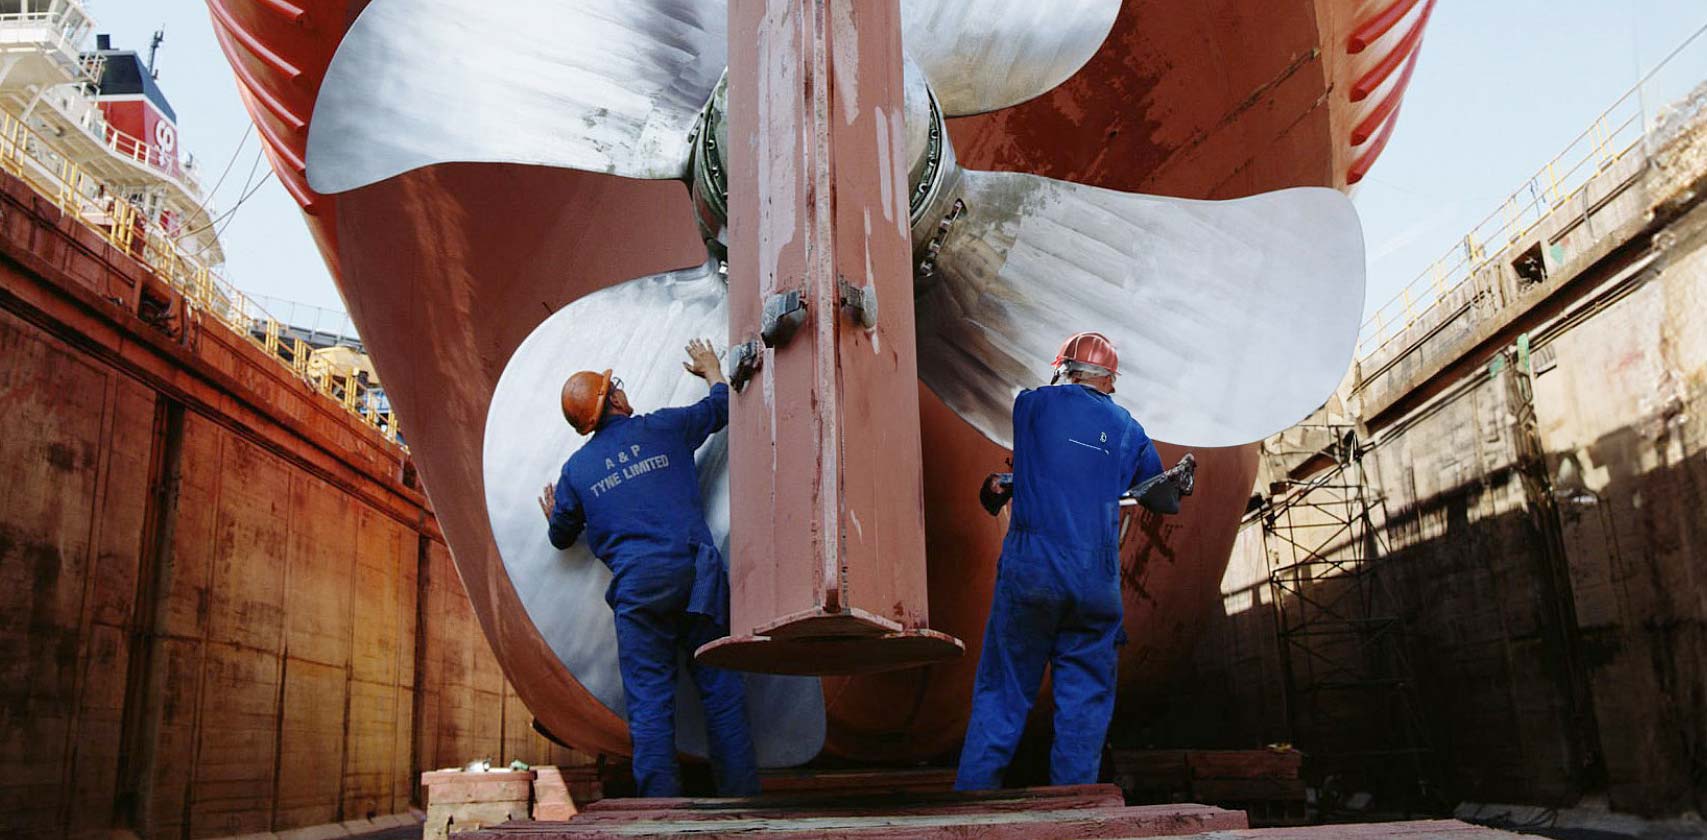 Two workers working on a large ship's propeller